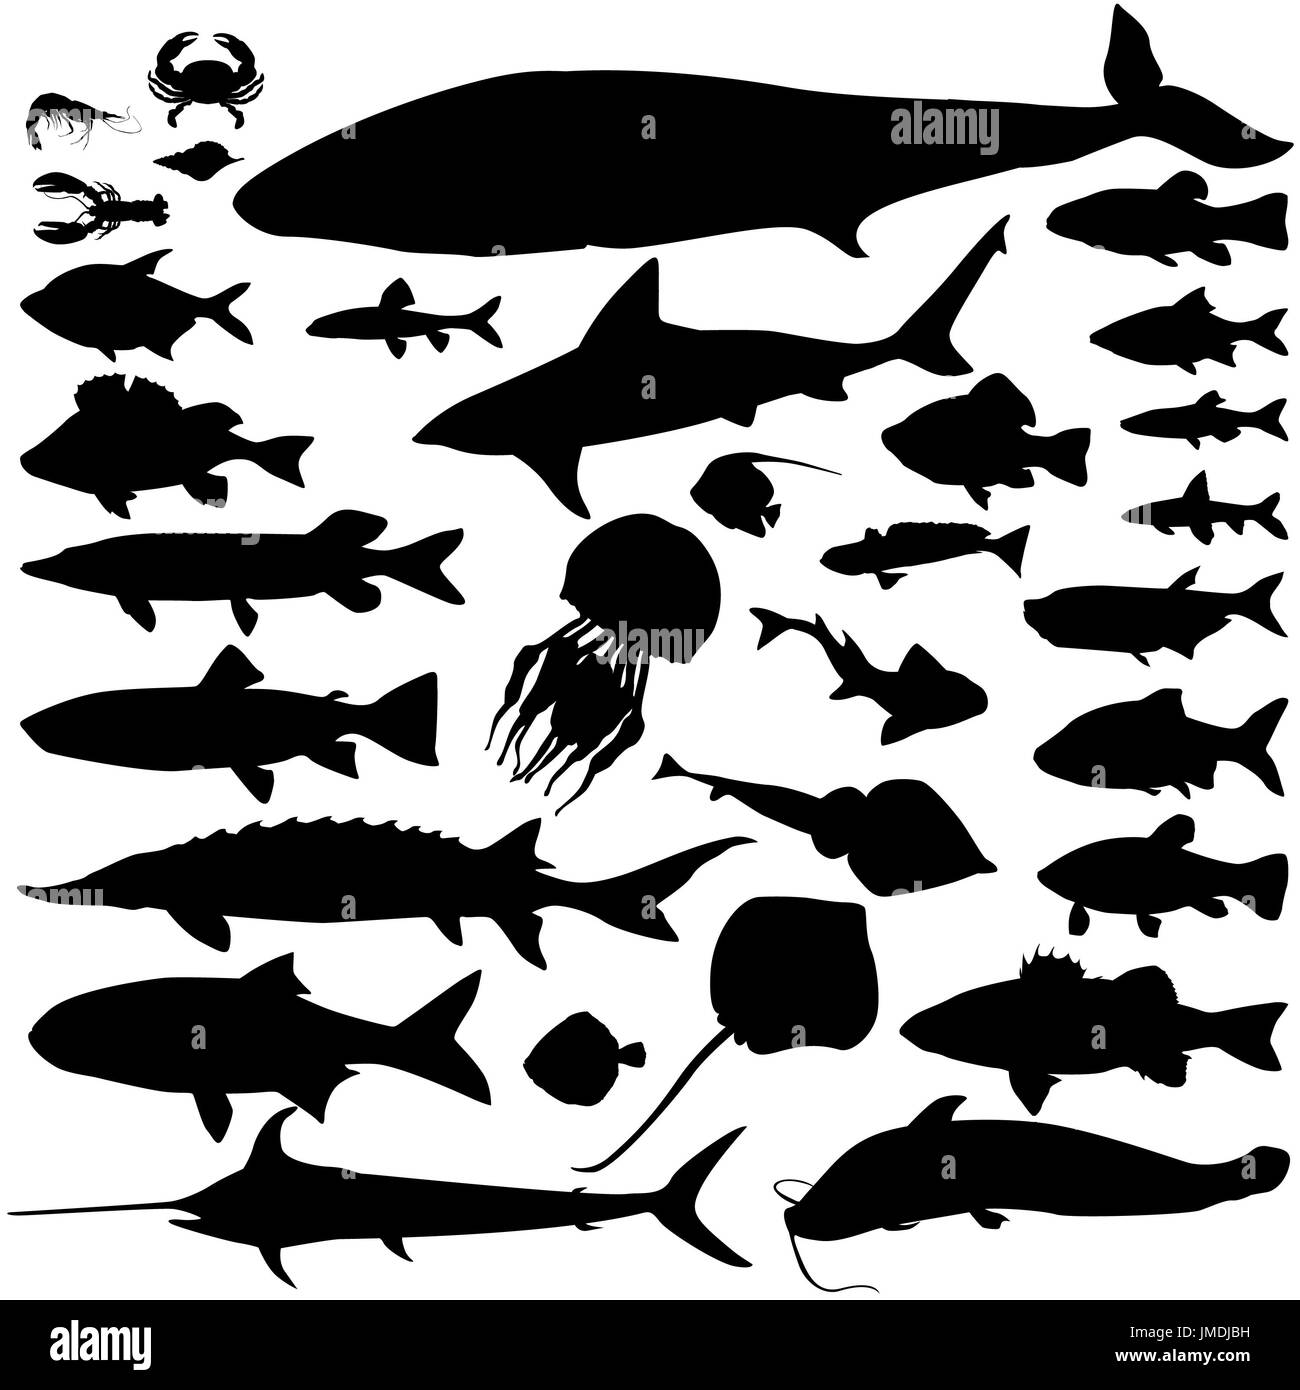 River, sea fish food silhouette set. Marine fish and mammals. Seafood icon collection. Ocean underwater wildlife signs Stock Photo